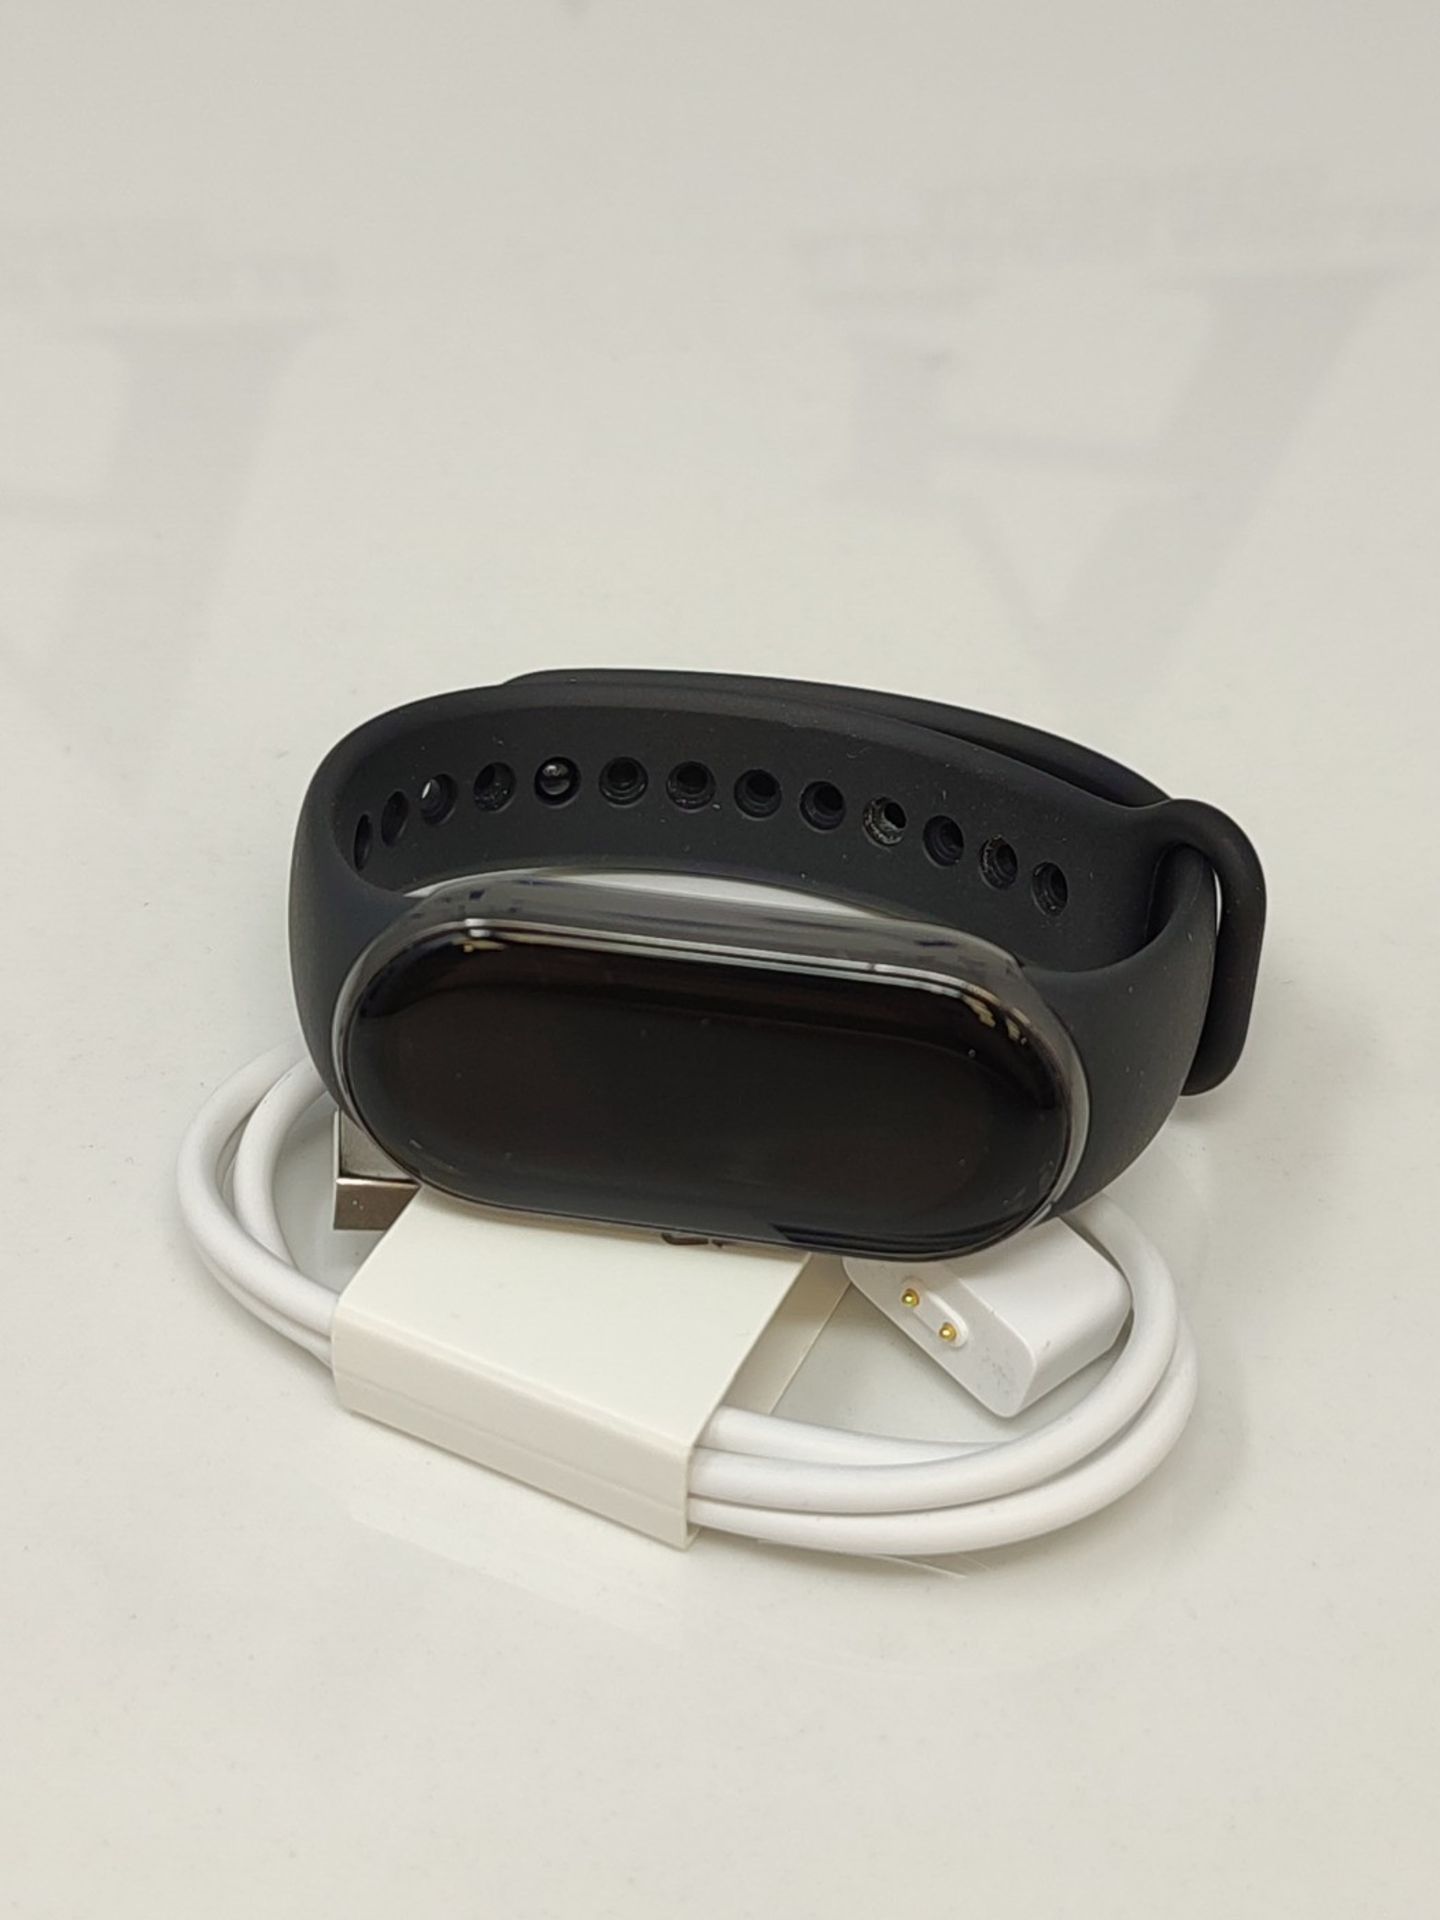 Xiaomi Smart Band 8 Fitness Tracker, 1.62" AMOLED Display, 16 days battery life, 5ATM, - Image 3 of 3